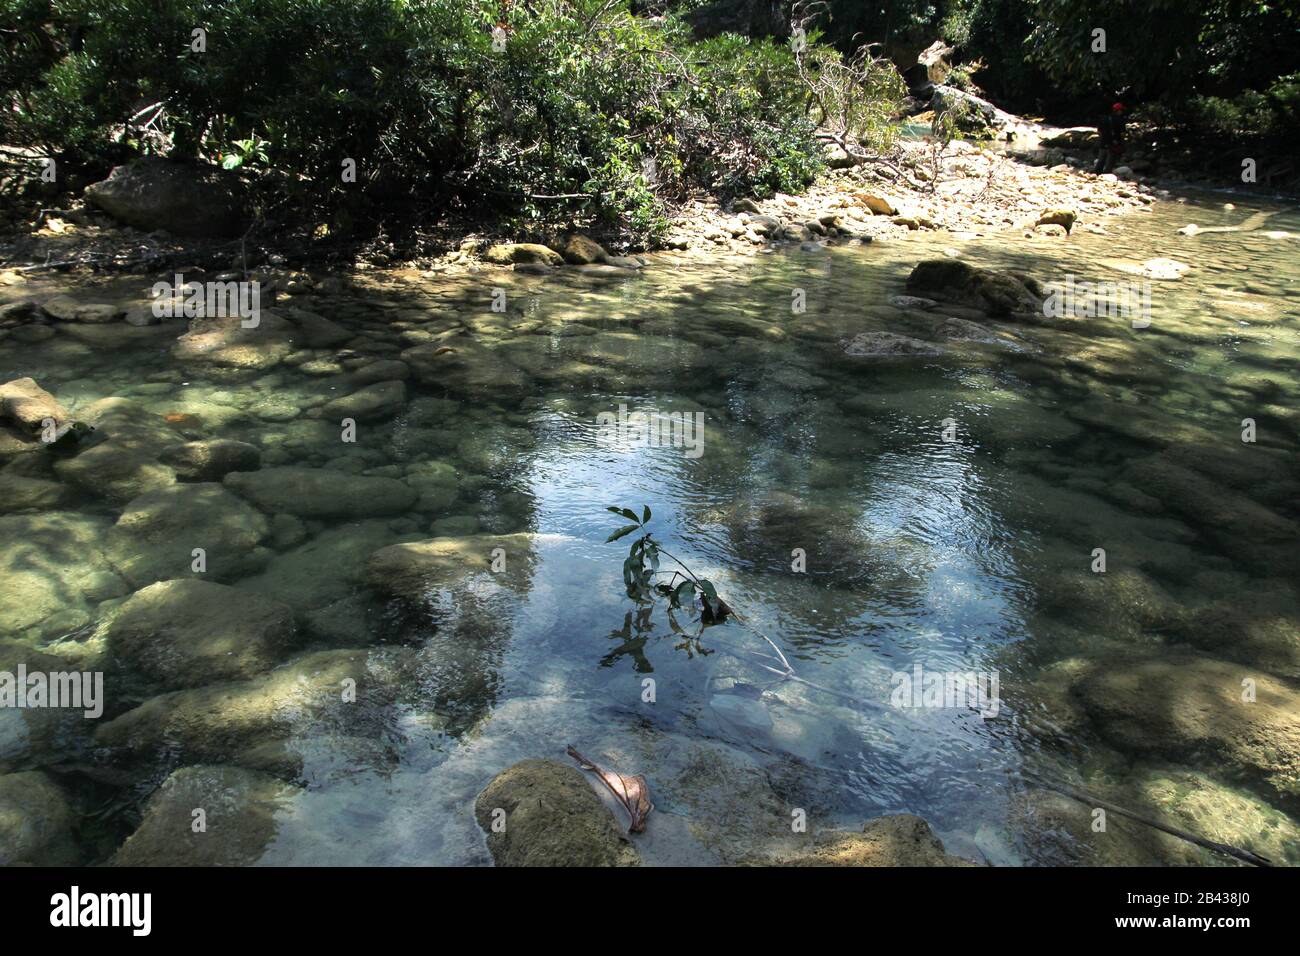 Riverside scene with stones visible through crystal clear waters. Stock Photo